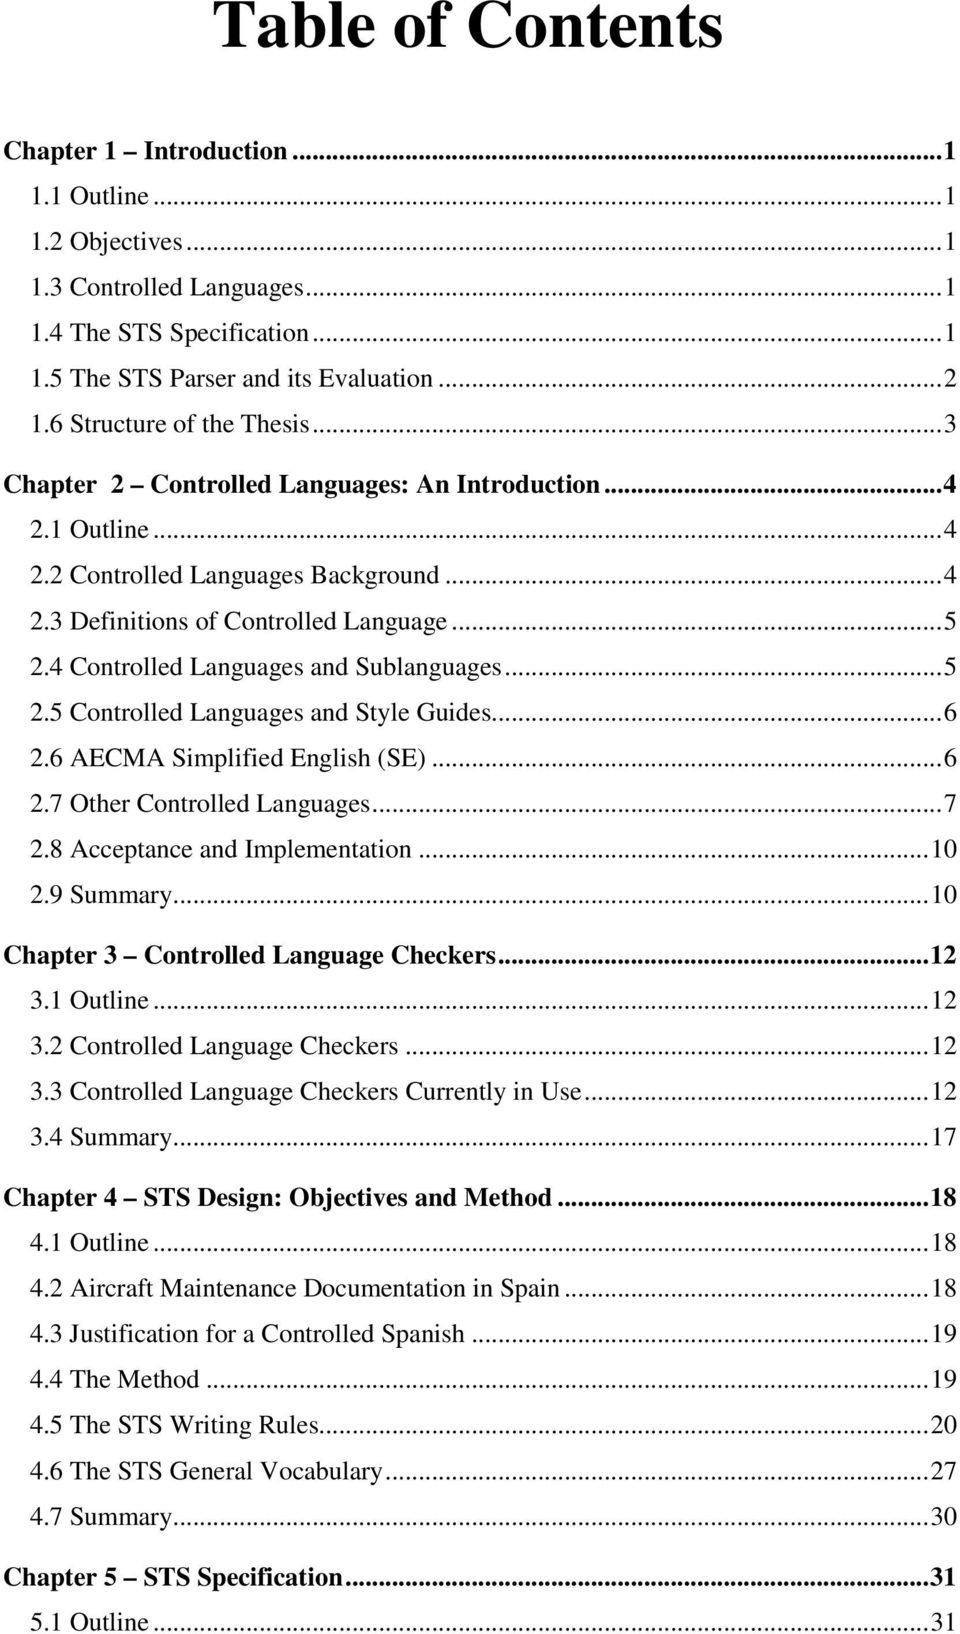 4 Controlled Languages and Sublanguages...5 2.5 Controlled Languages and Style Guides...6 2.6 AECMA Simplified English (SE)...6 2.7 Other Controlled Languages...7 2.8 Acceptance and Implementation.